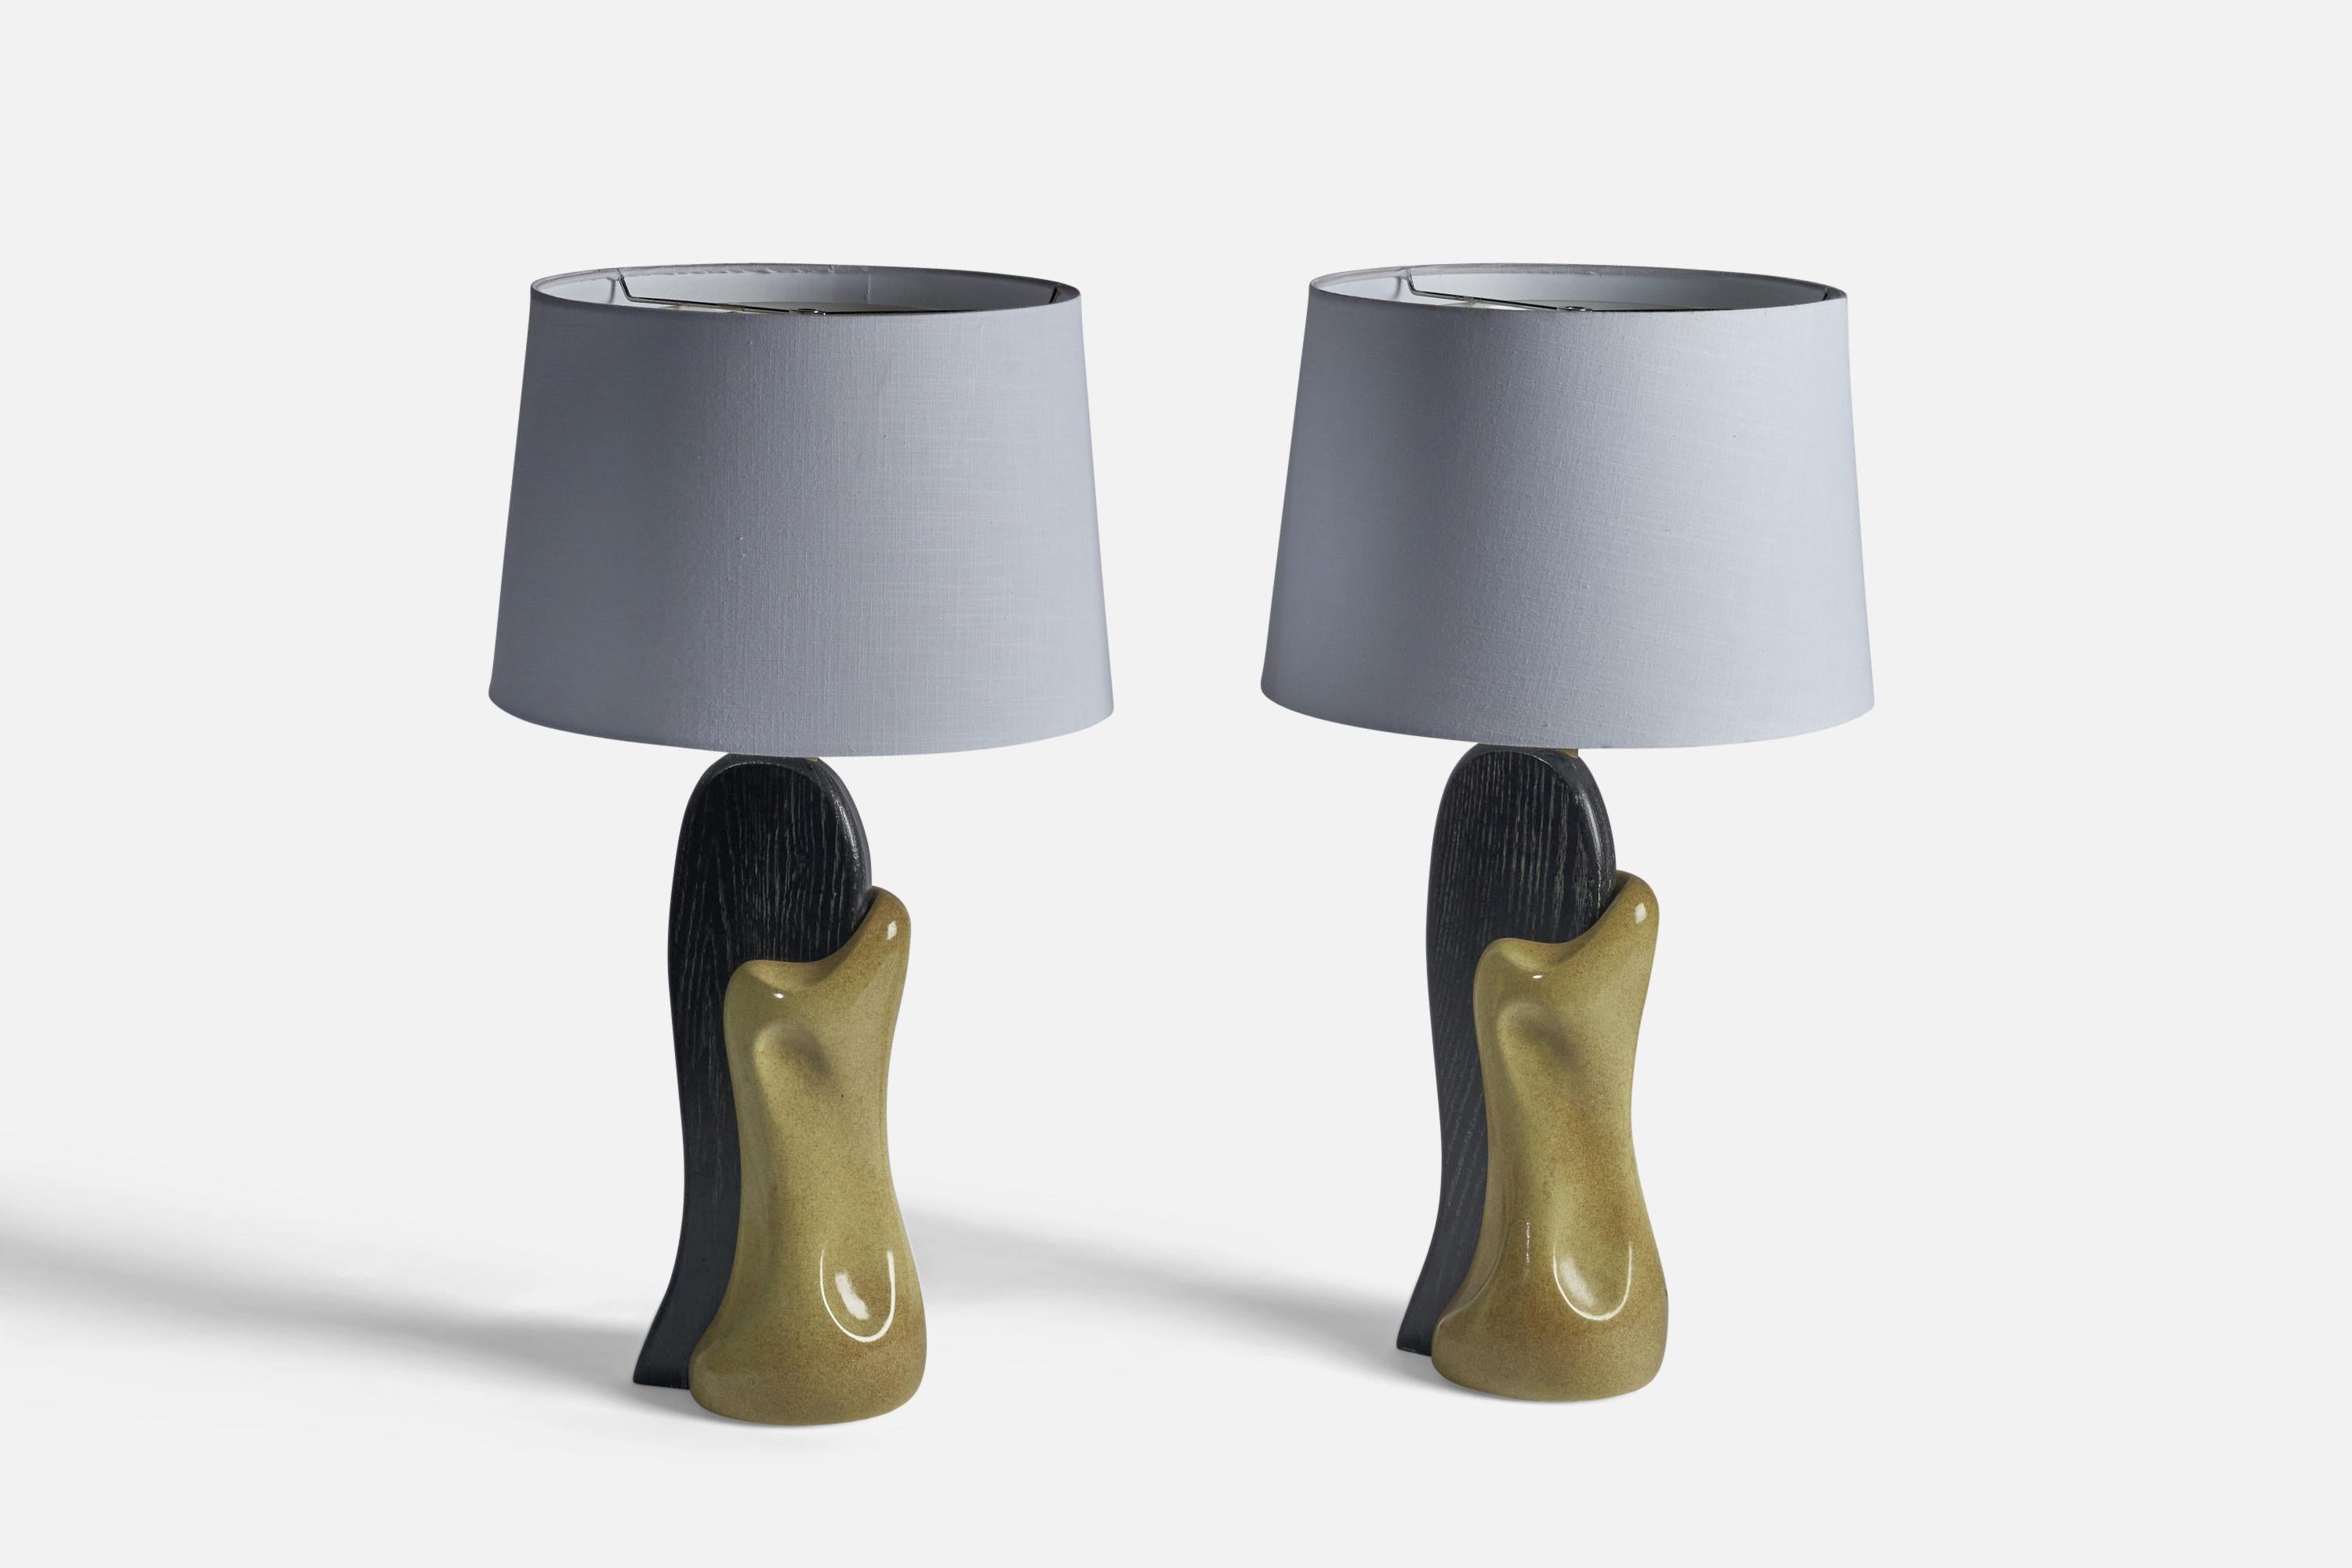 A pair of black-cerused oak and yellow-glazed ceramic table lamps, designed and produced by Yasha Heifetz, USA, 1950s.

Dimensions of Lamp (inches): 26.75